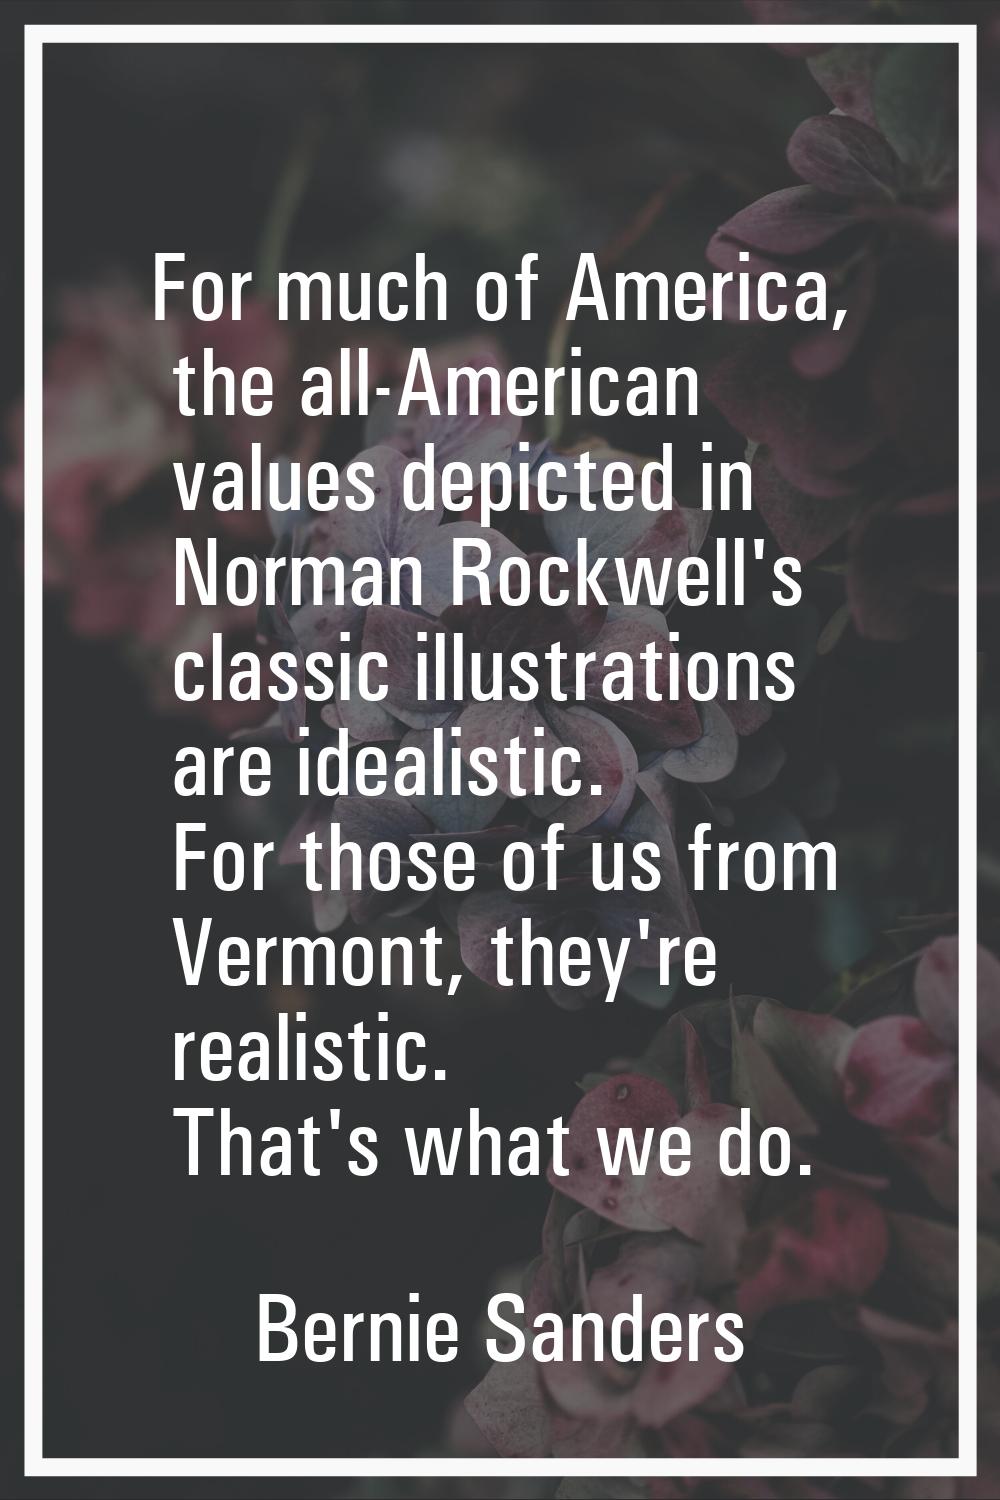 For much of America, the all-American values depicted in Norman Rockwell's classic illustrations ar